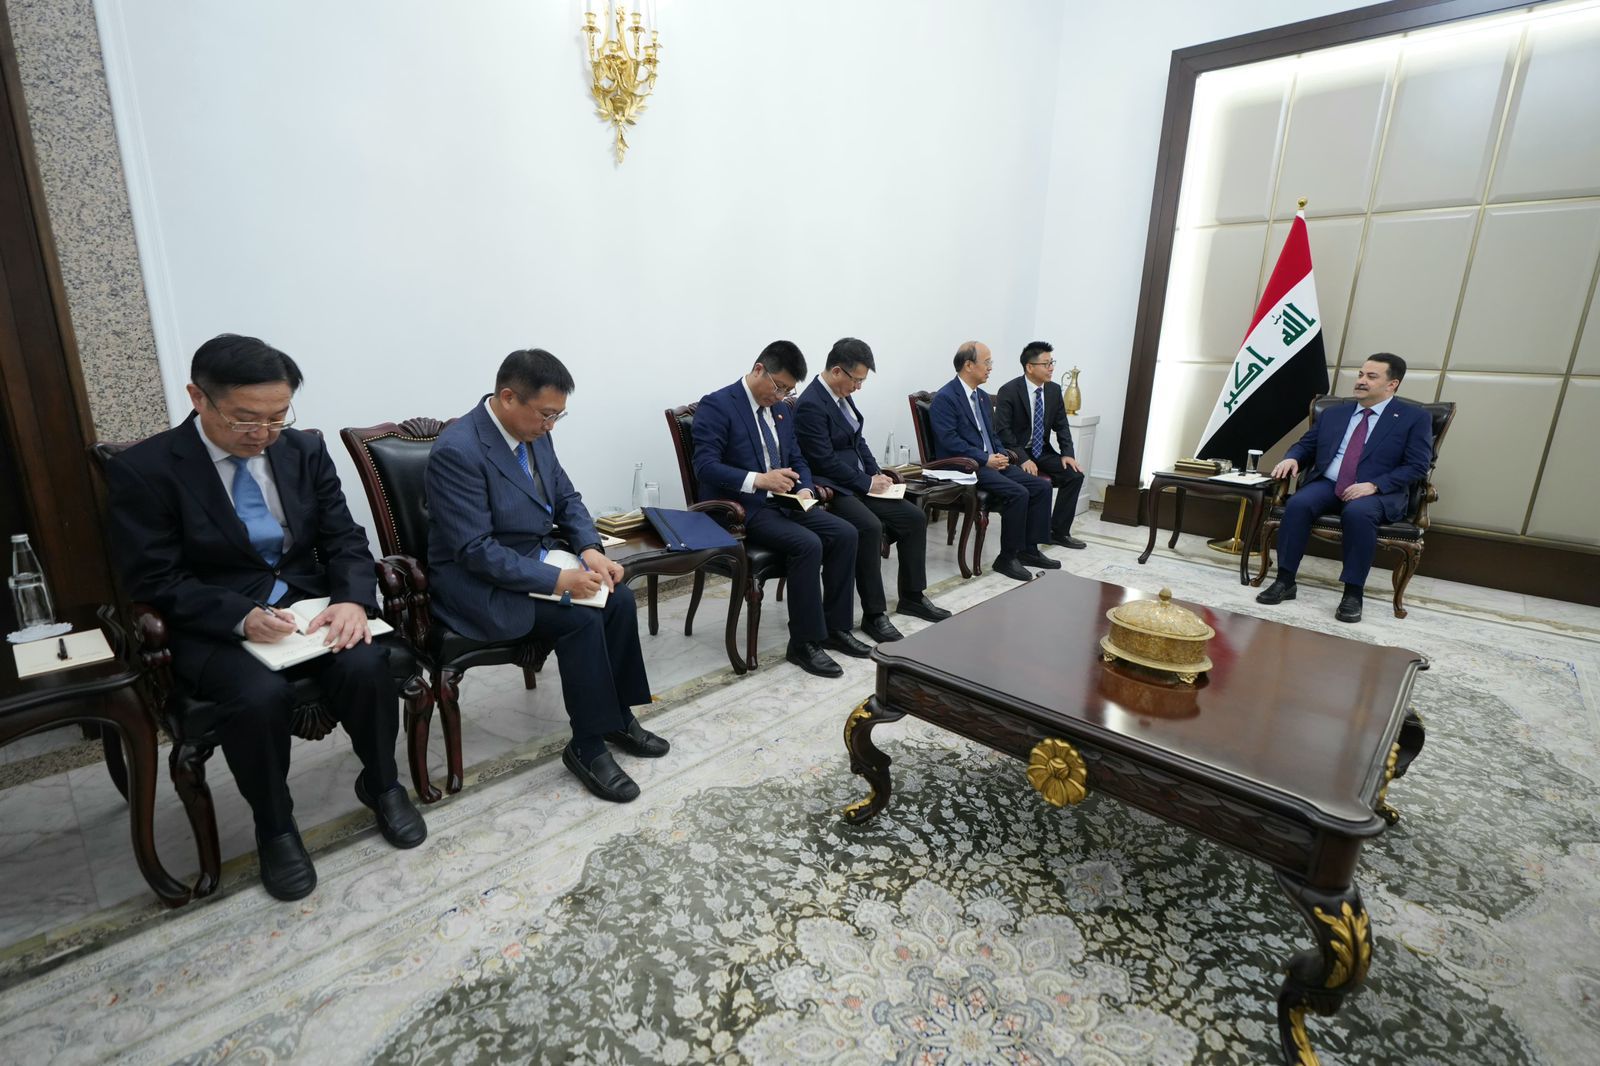 Iraqi PM sees potential in linking Belt and Road projects and development roads